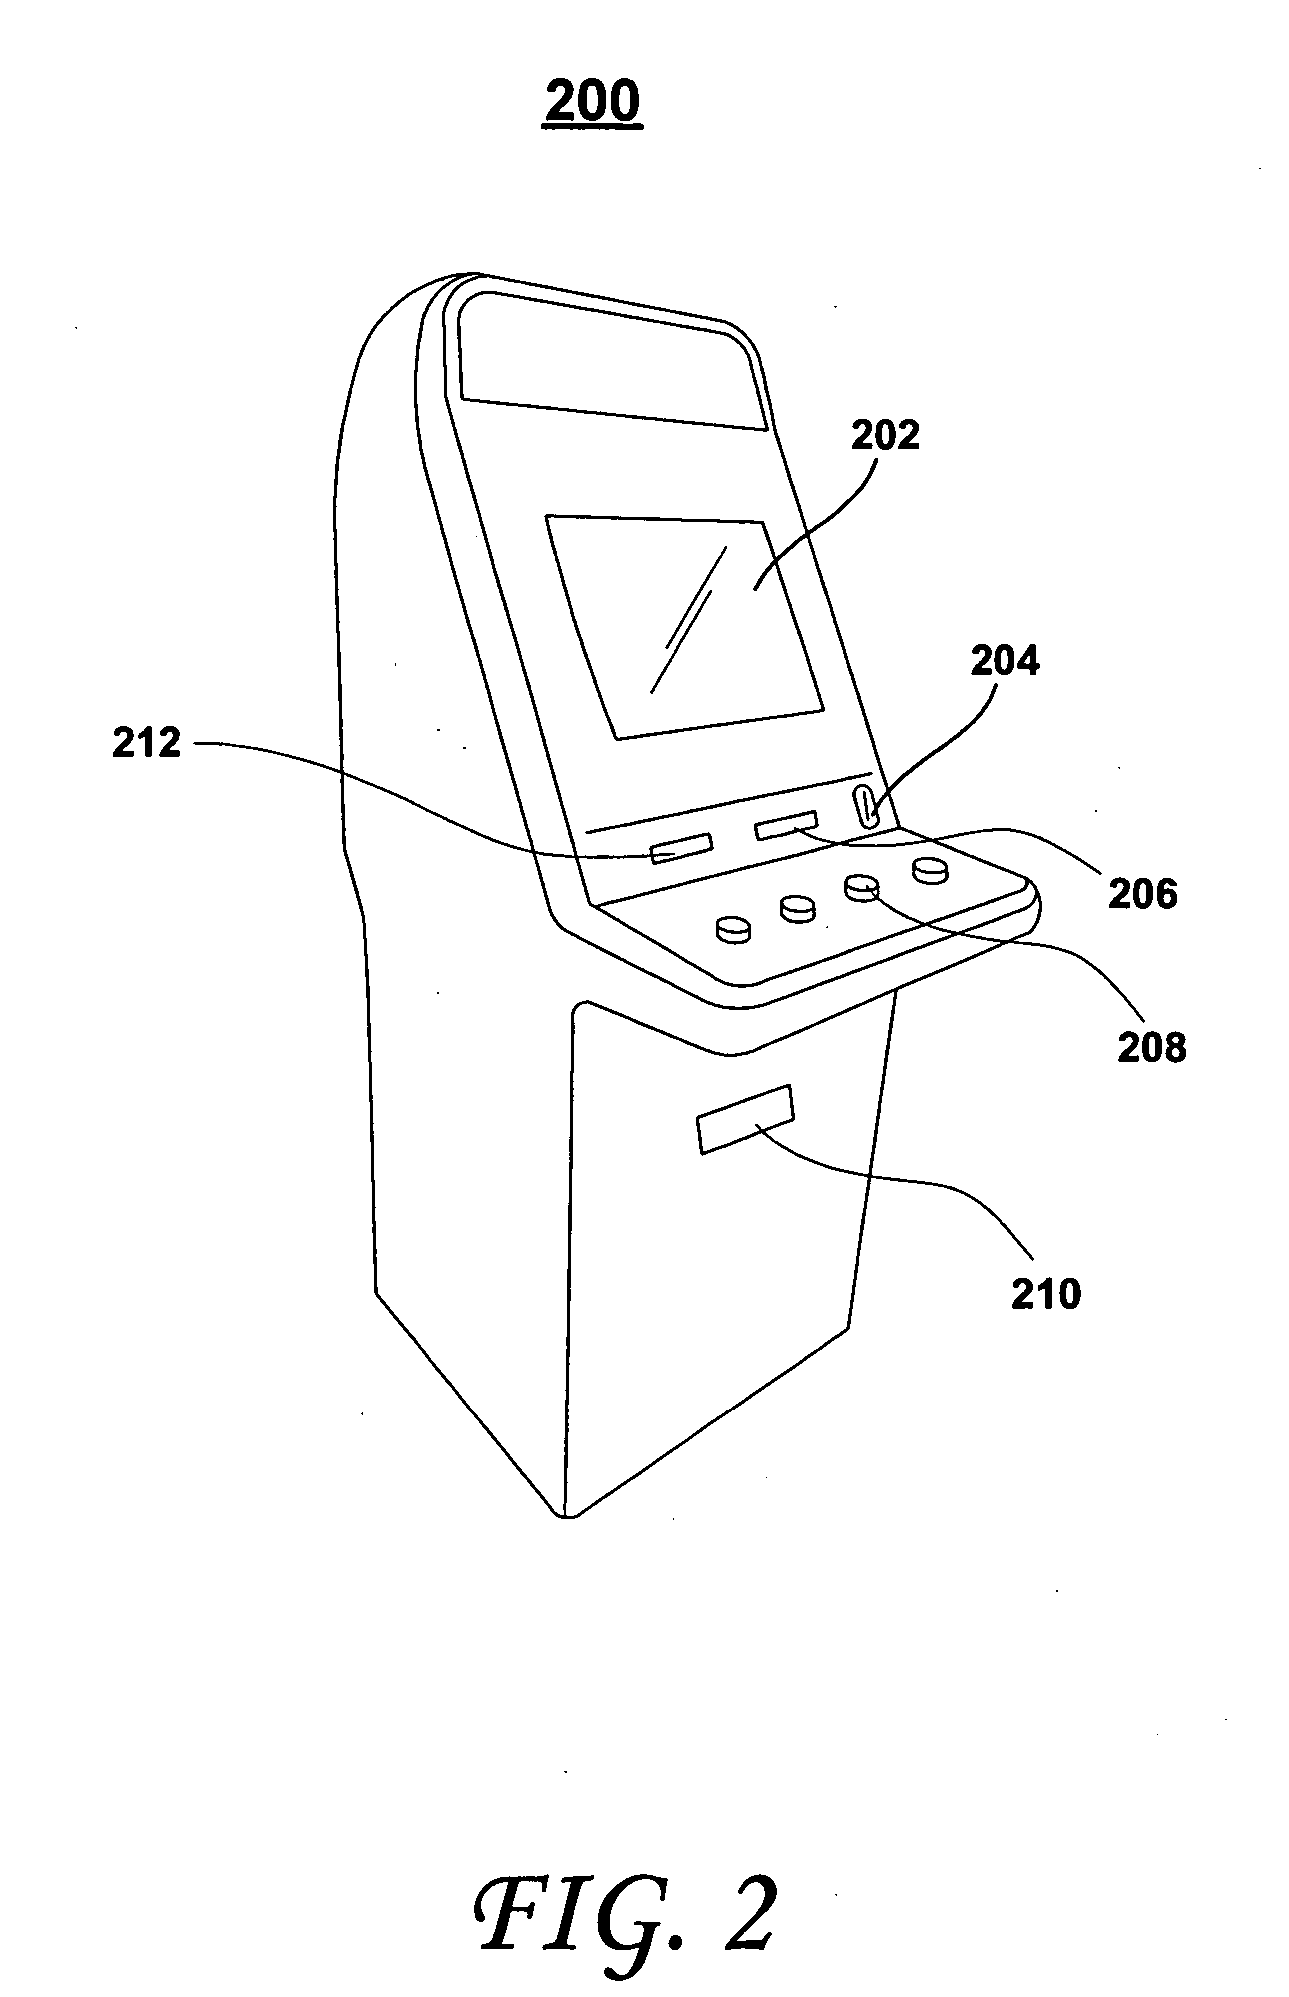 Modular entertainment and gaming system configured to capture raw biometric data and responsive to directives from a remote server